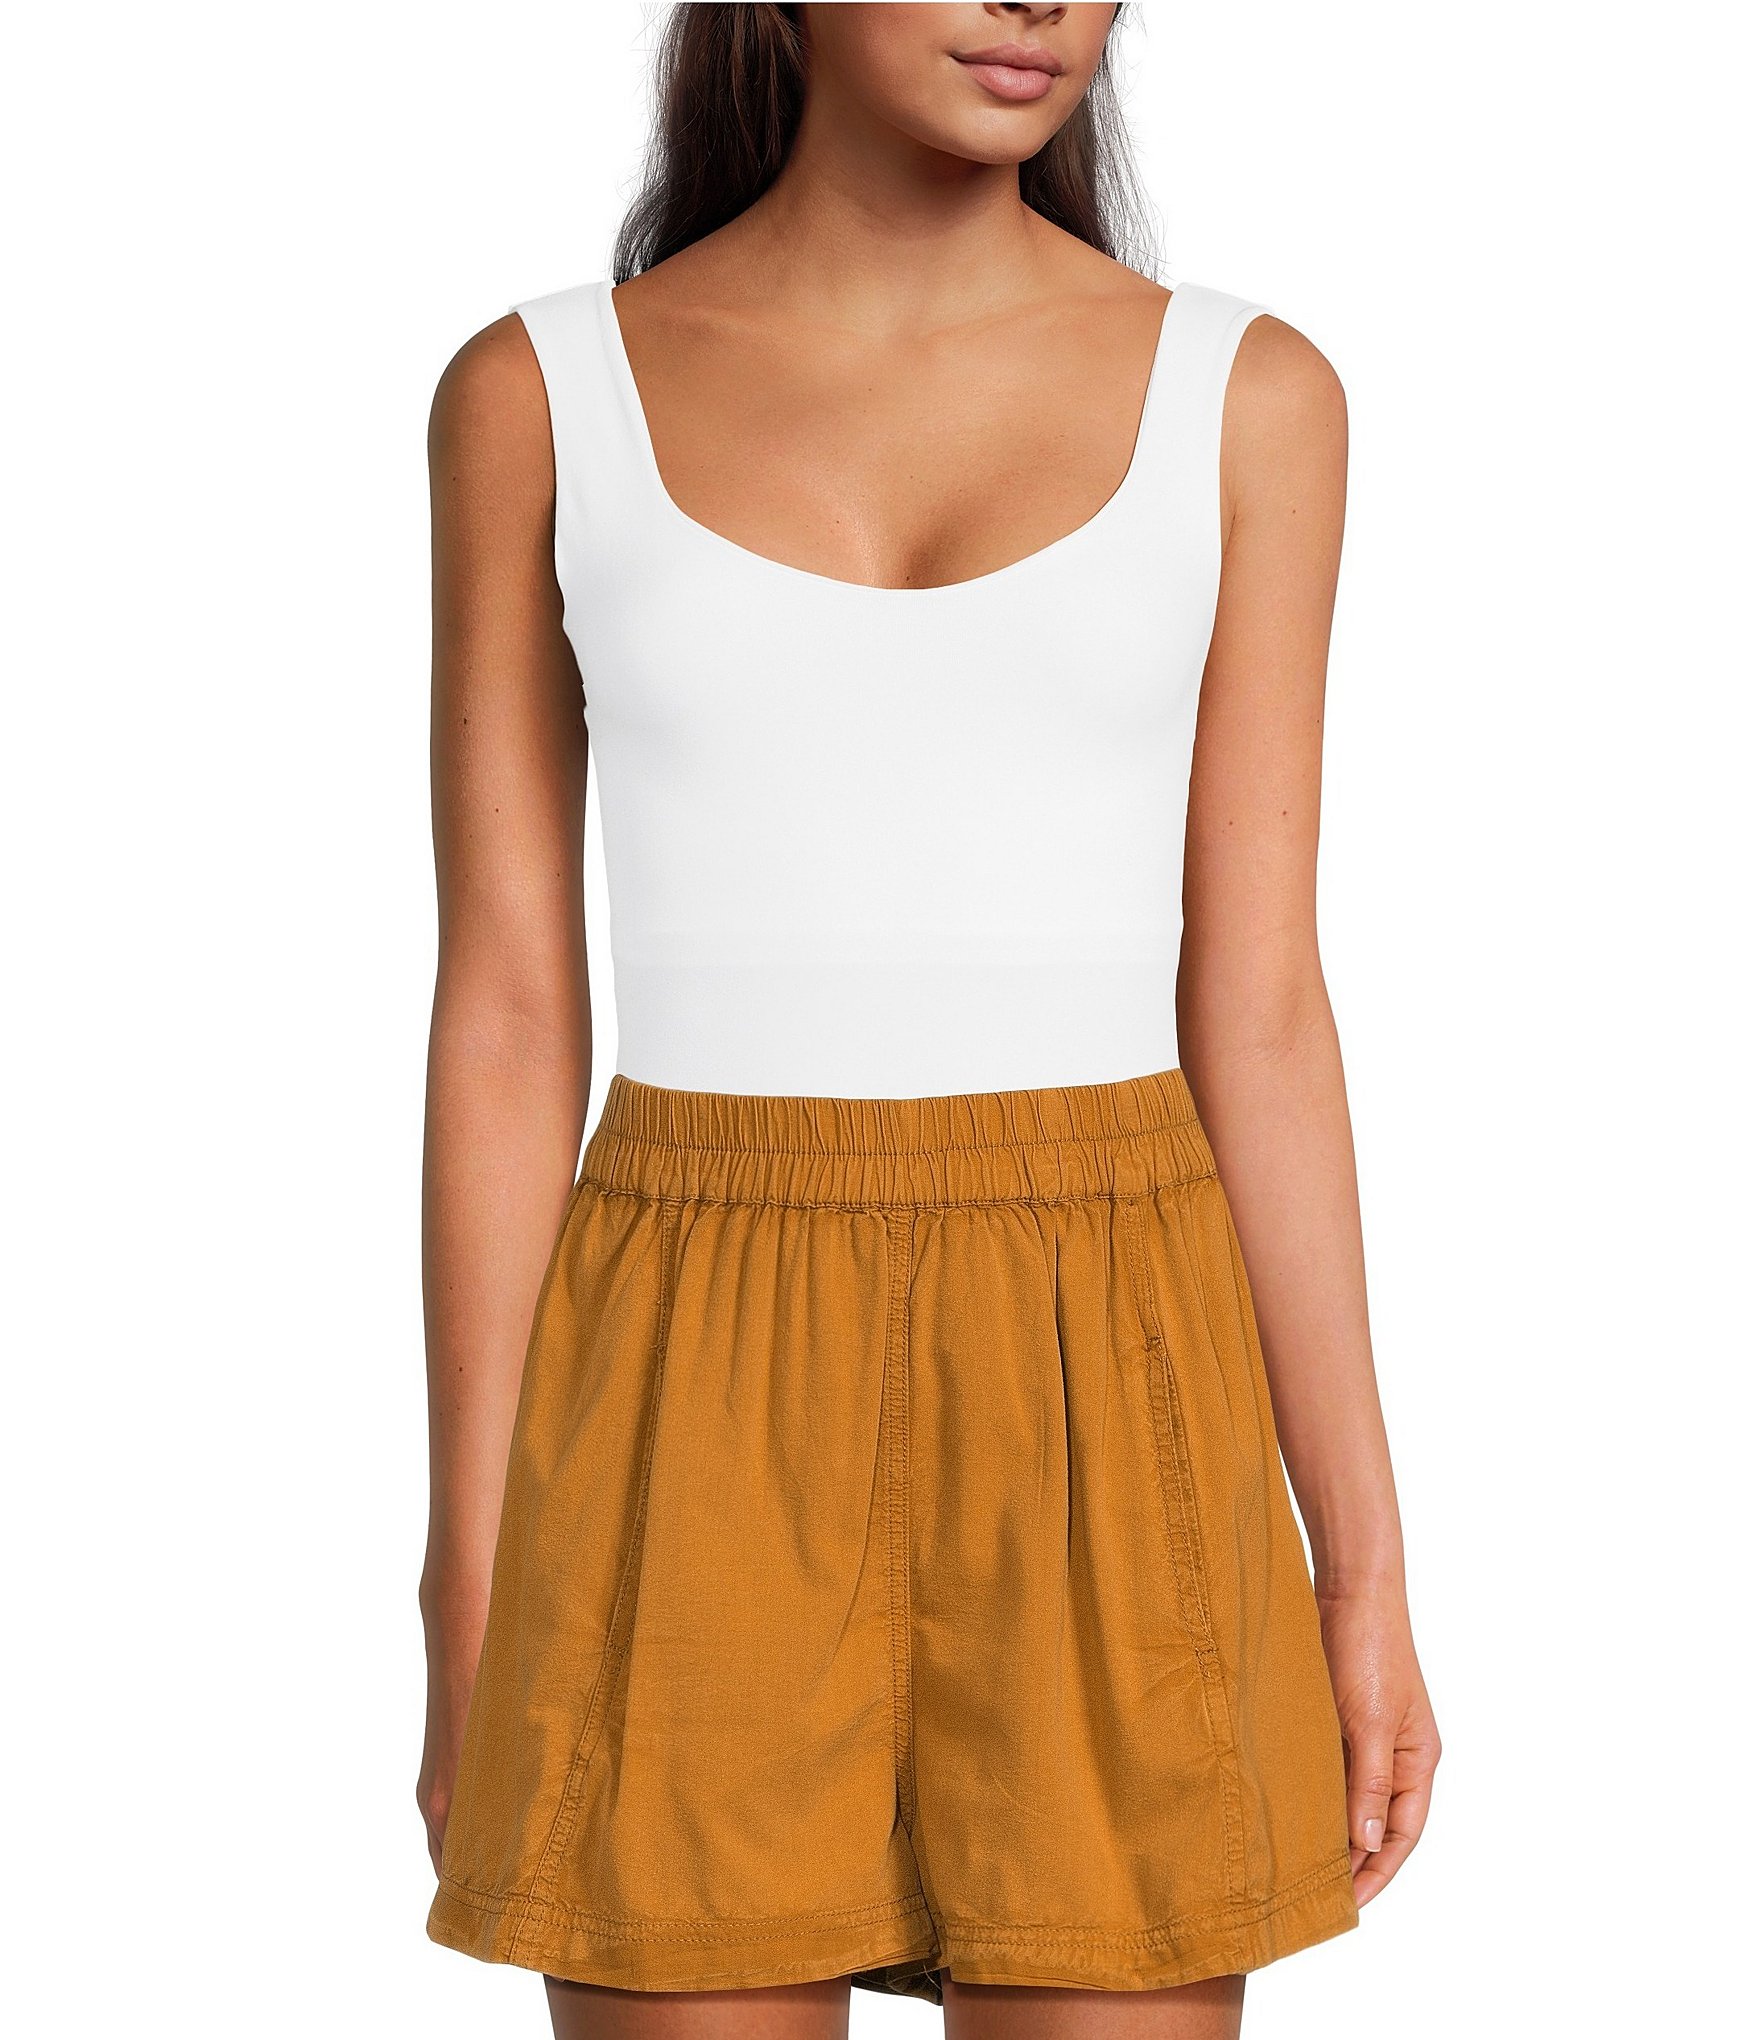 Free People Knit Clean Lines High Neck Sleeveless Camisole, Dillard's